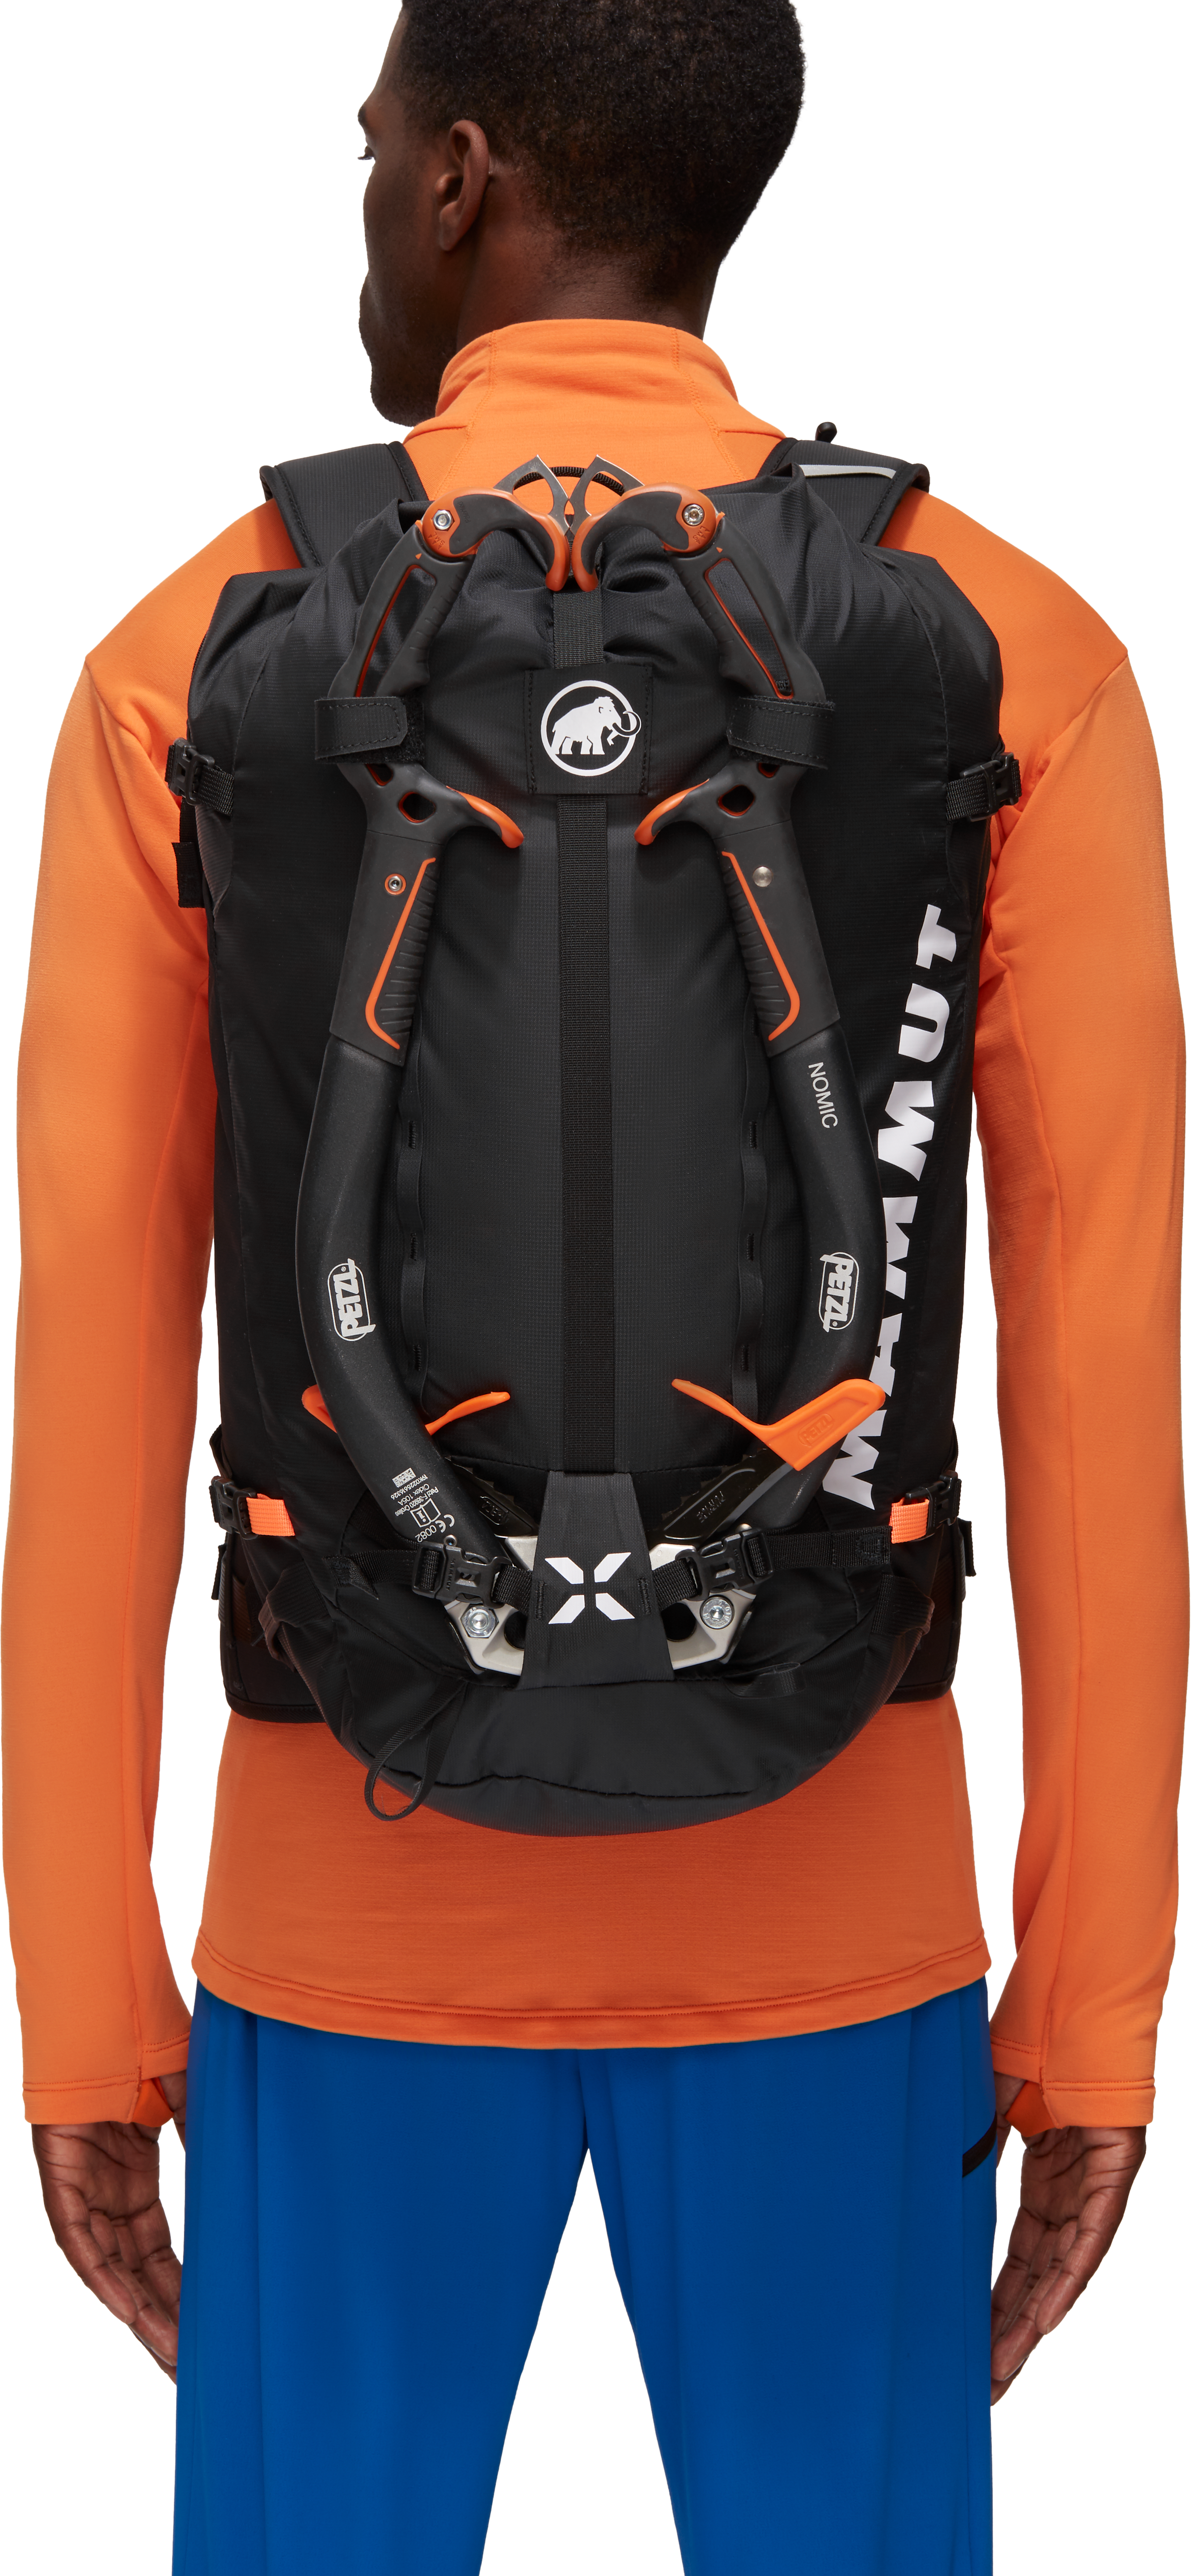 Trion Nordwand 28 Climbing Pack